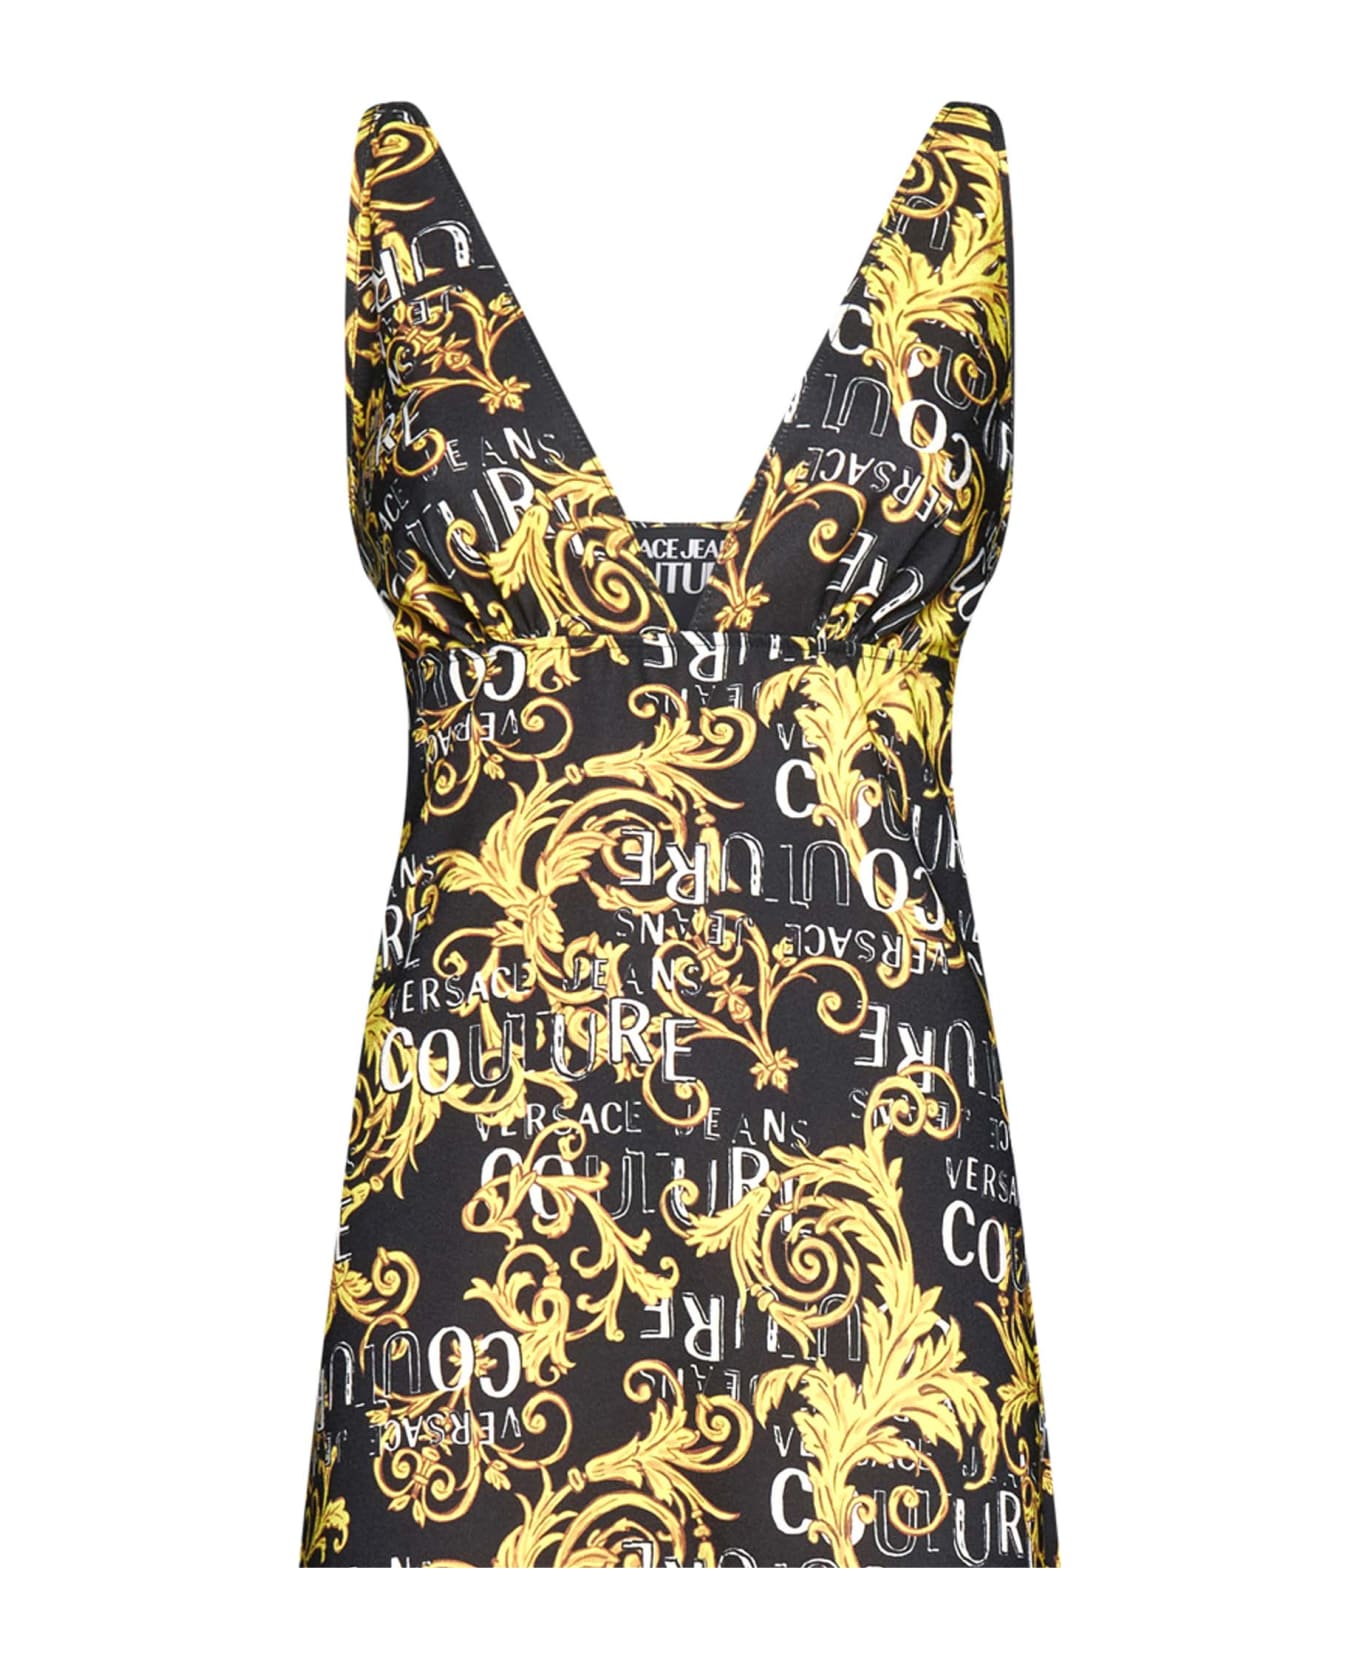 Versace Jeans Couture Dress - Black gold